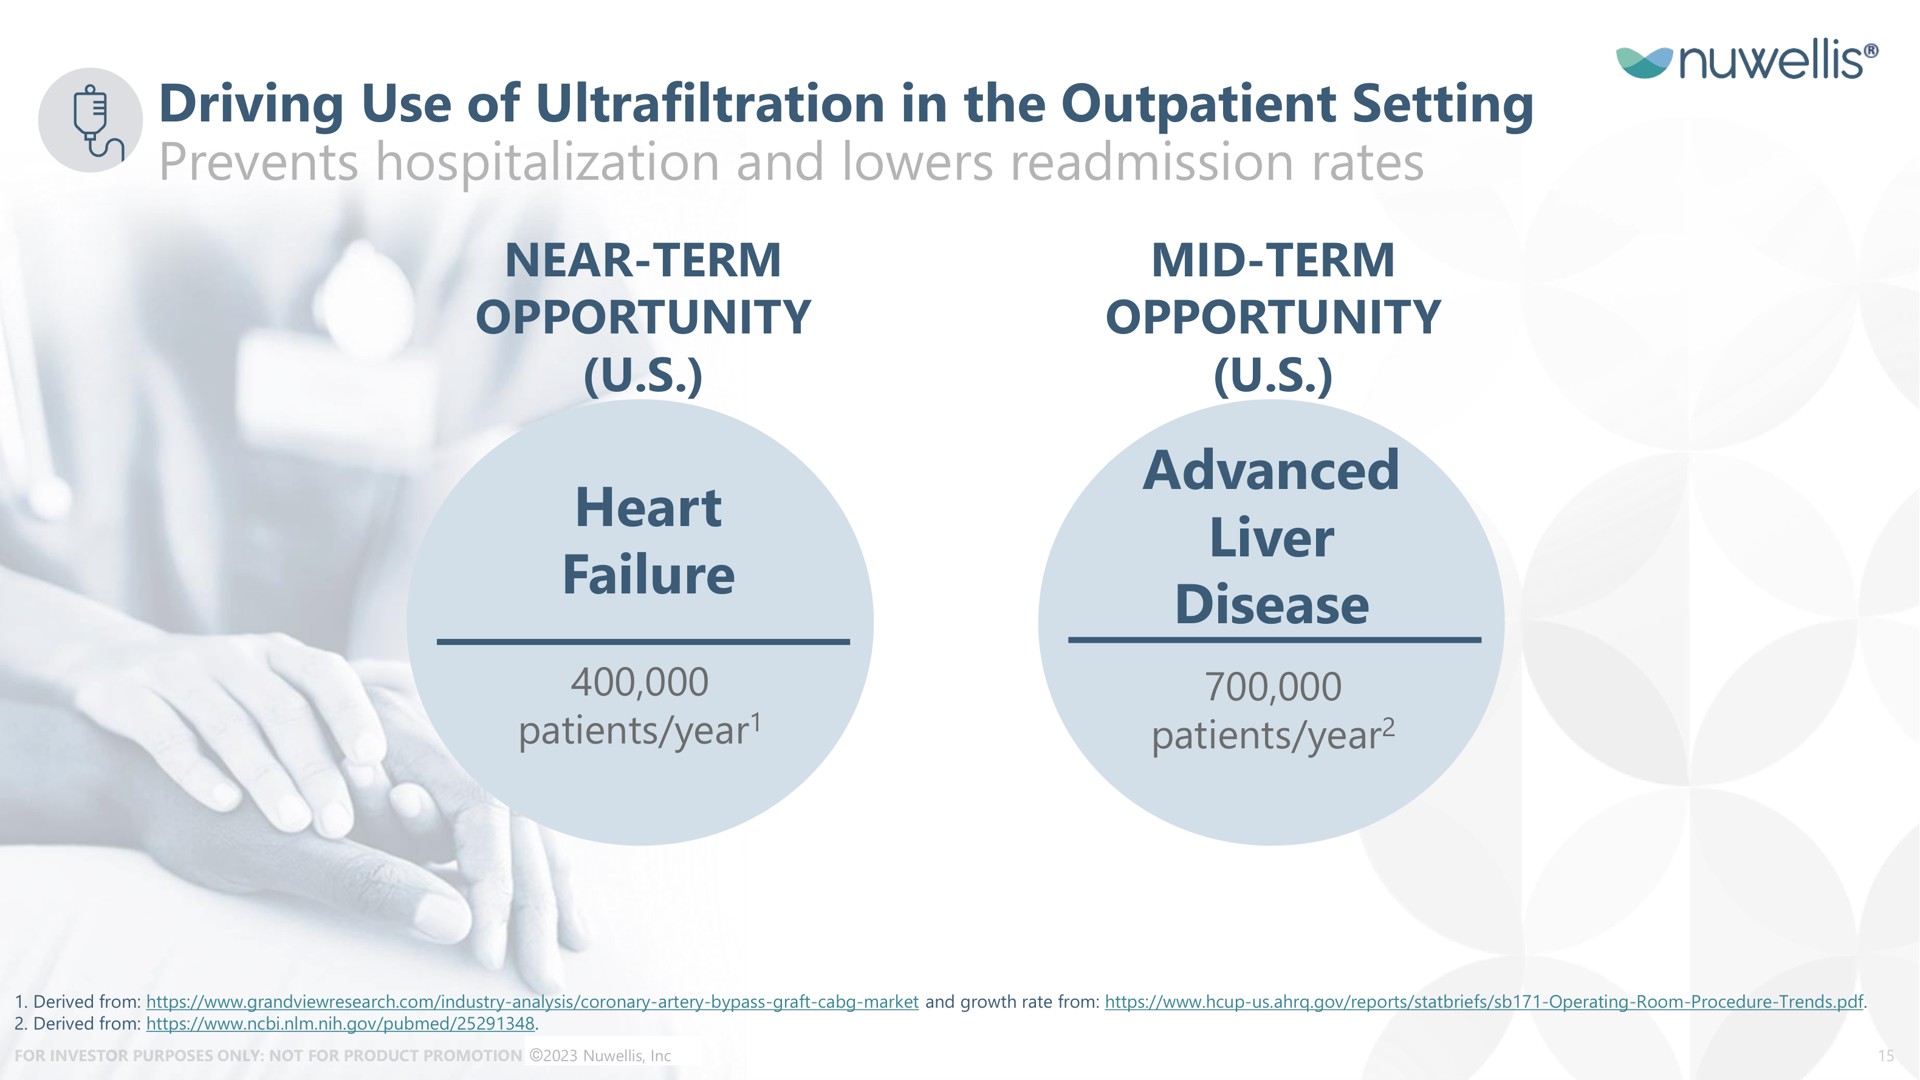 driving use of ultrafiltration in the outpatient setting prevents hospitalization and lowers readmission rates near term opportunity heart failure mid term opportunity advanced liver disease | Nuwellis